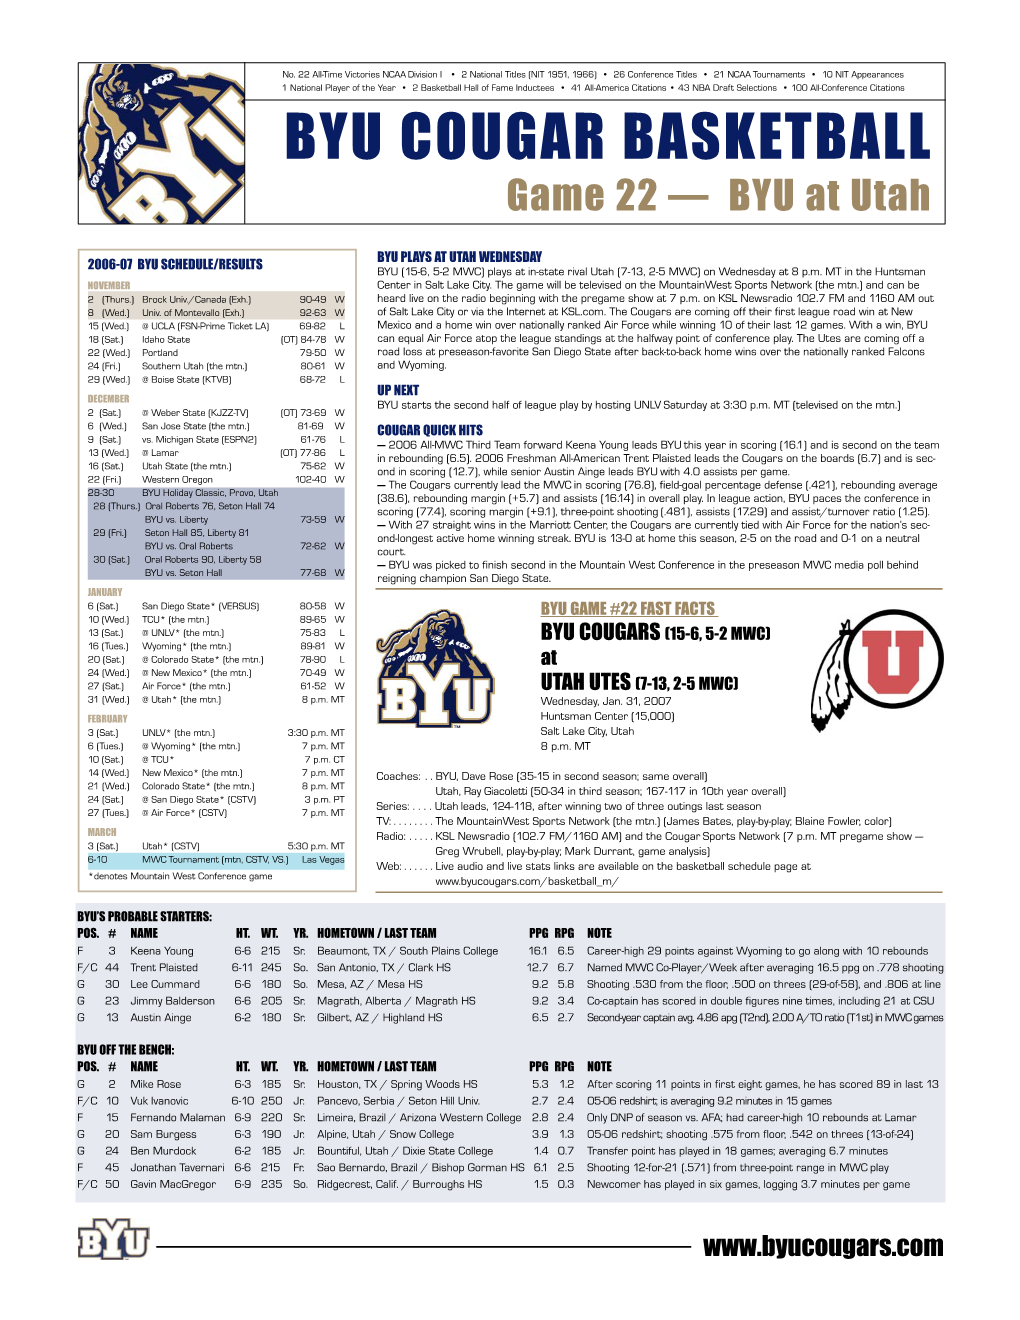 Print Game Notes